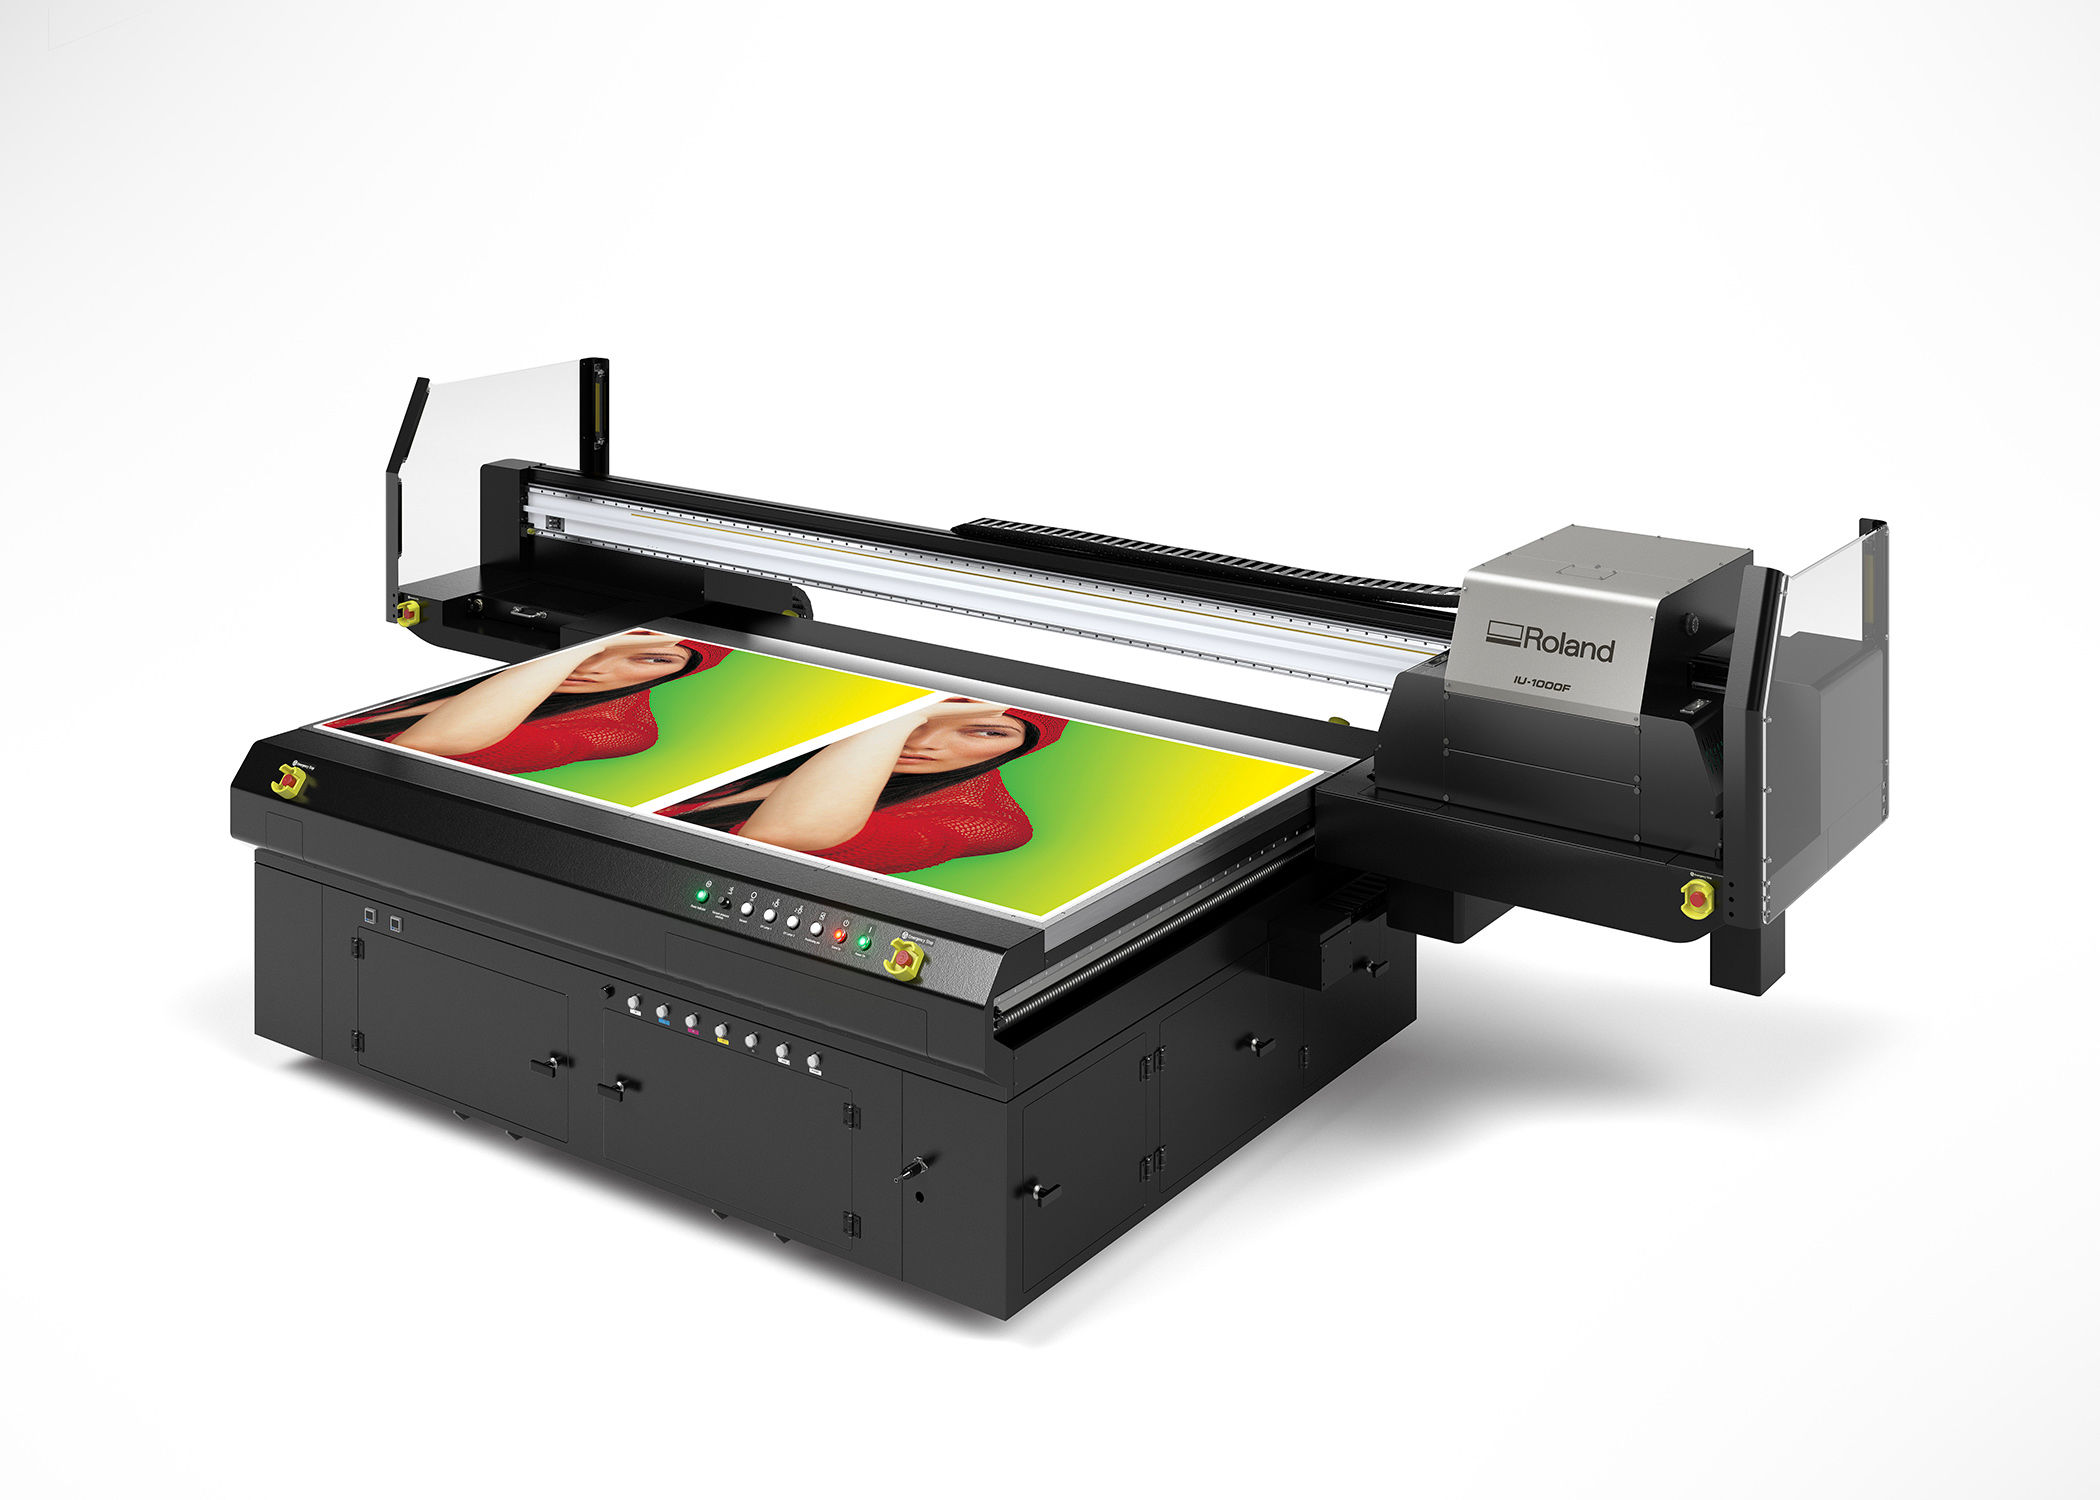 Roland DGA's newly launched IU-1000F high-volume UV flatbed printer.